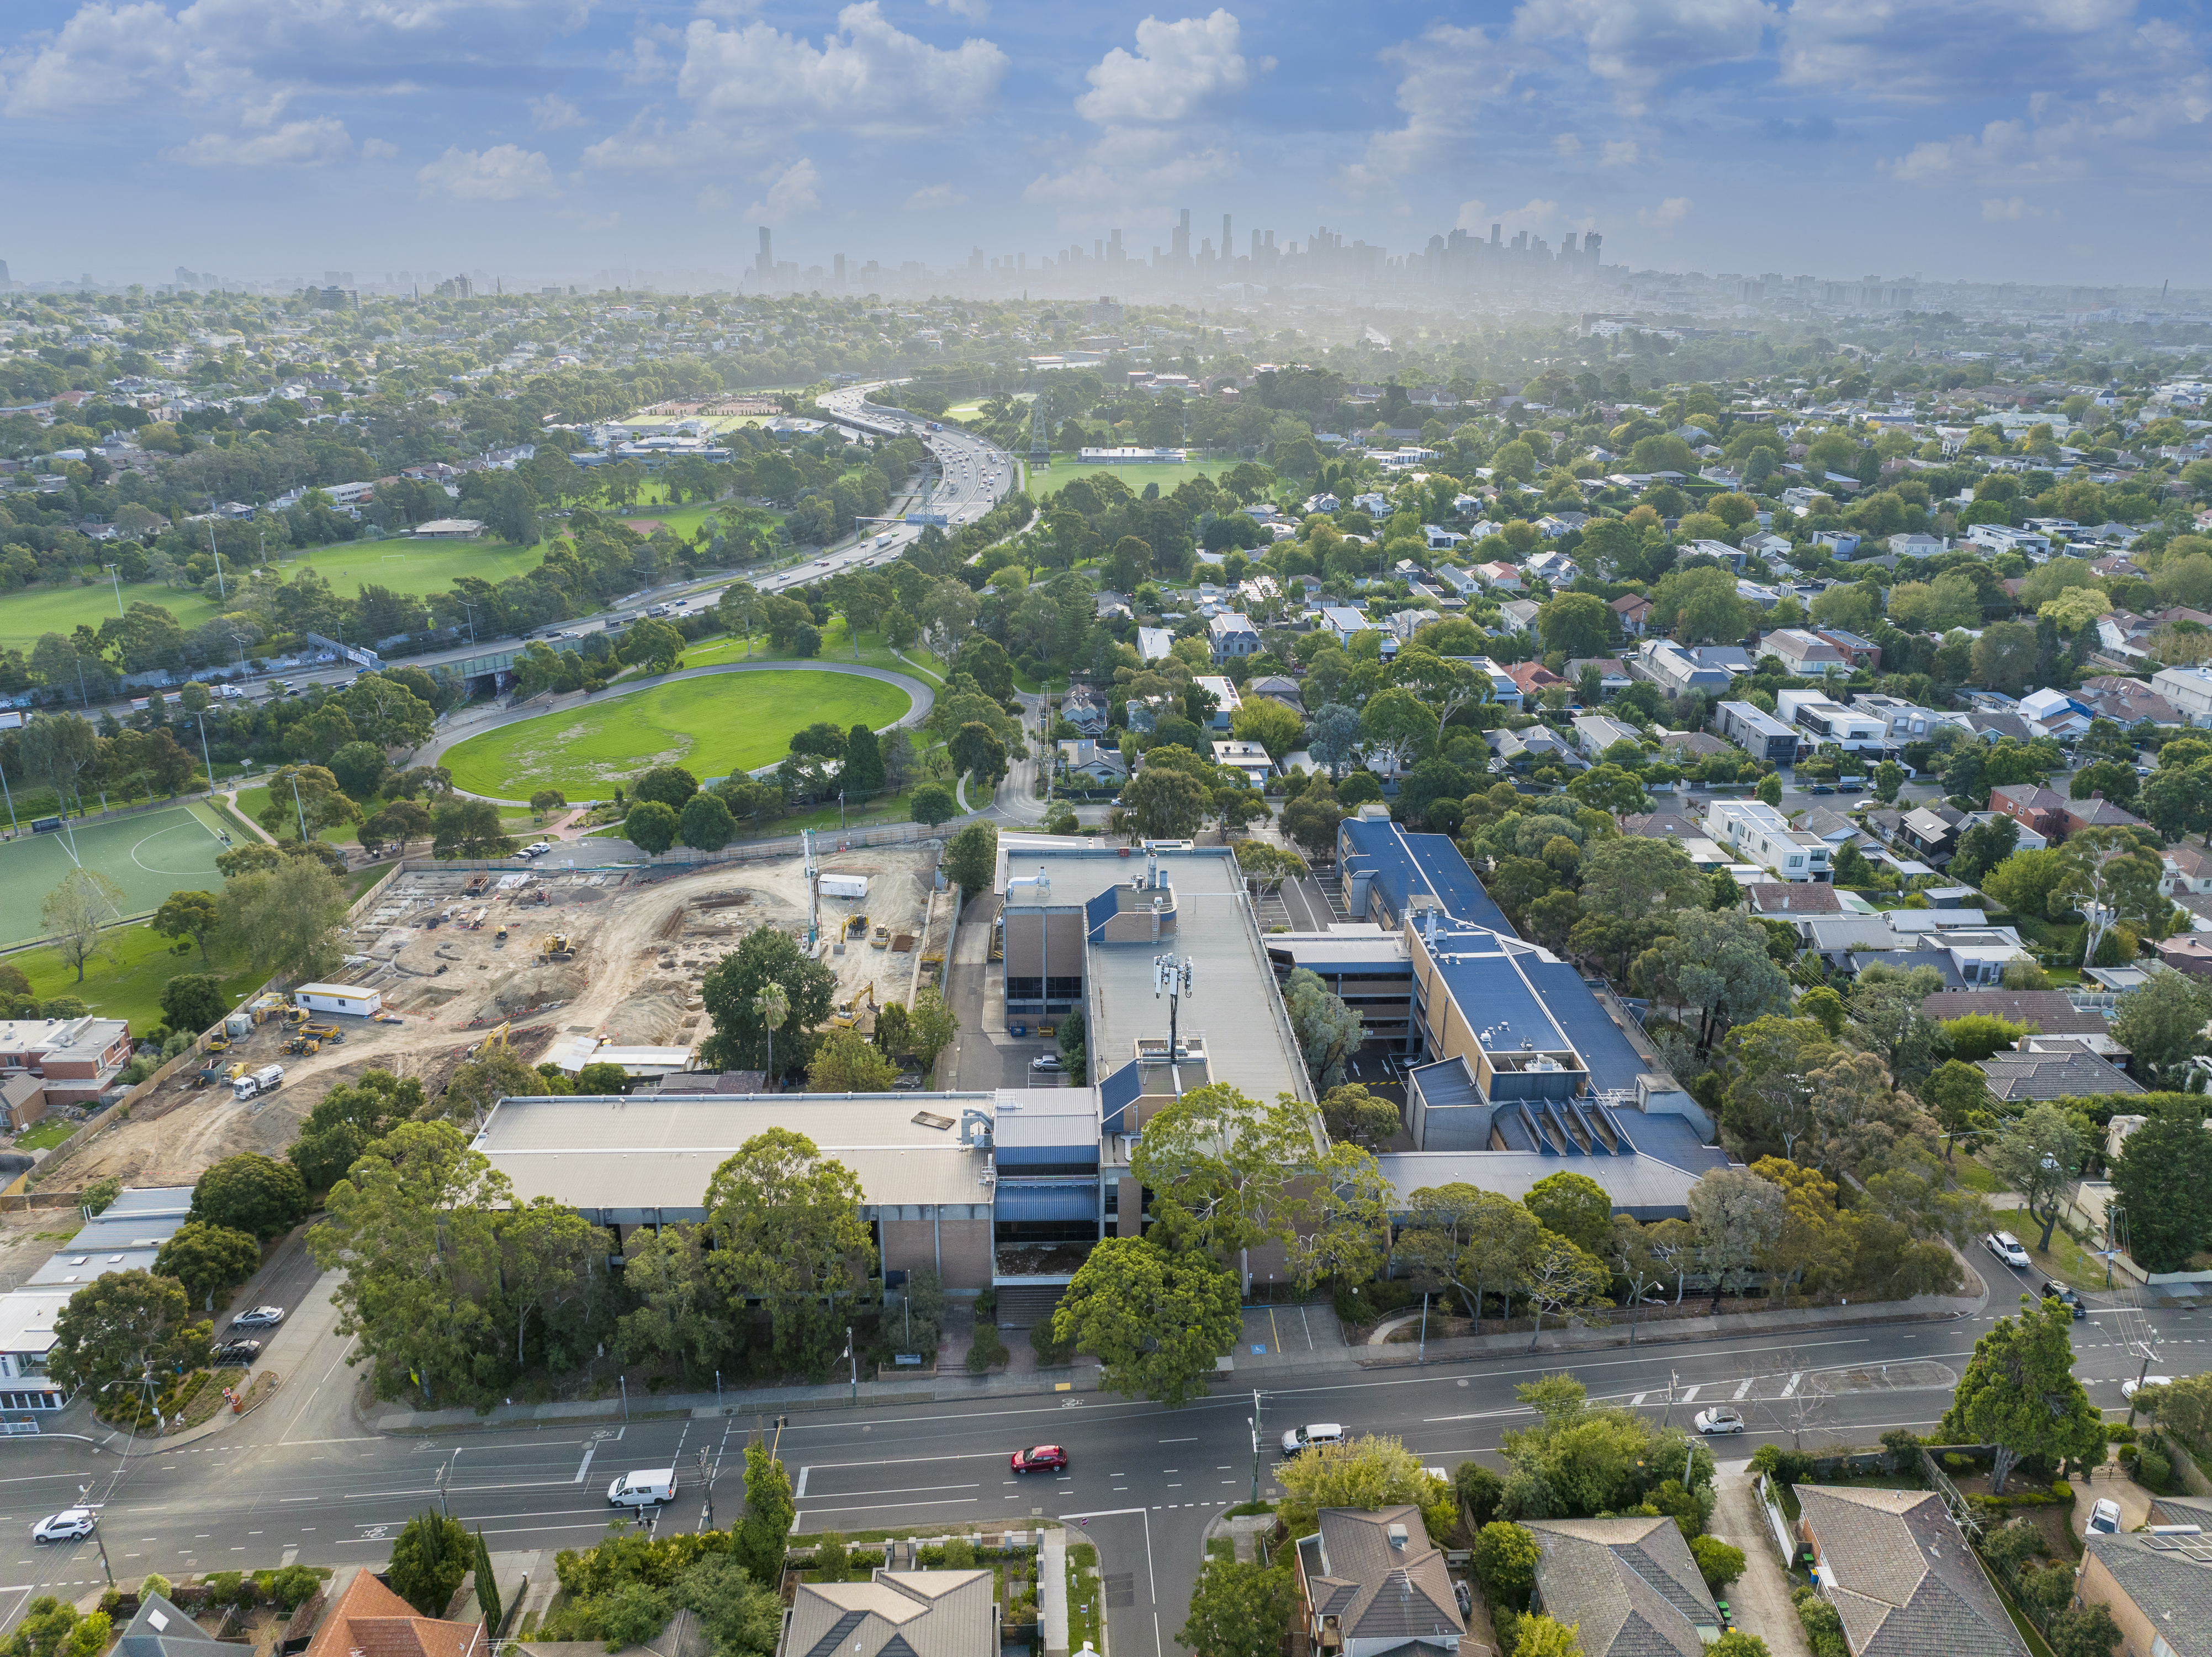 Hamton will develop the University of Melbourne's Hawthorn land into a boutique apartment complex.